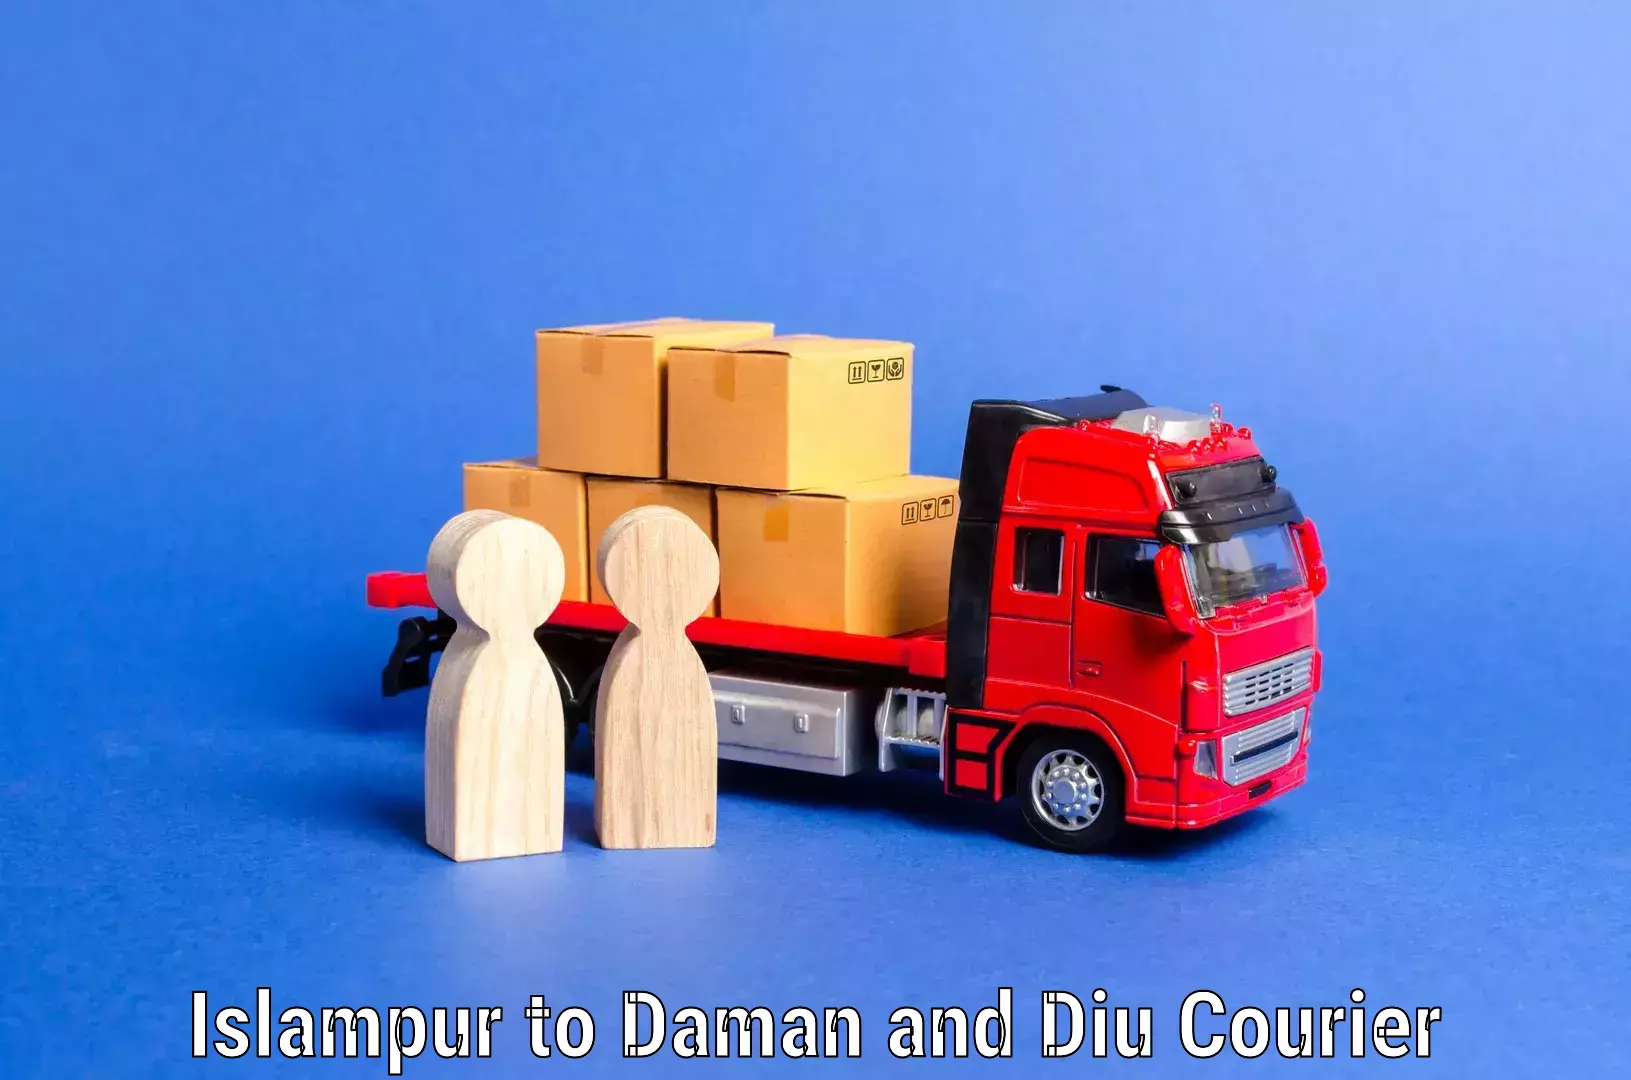 Budget-friendly movers Islampur to Daman and Diu